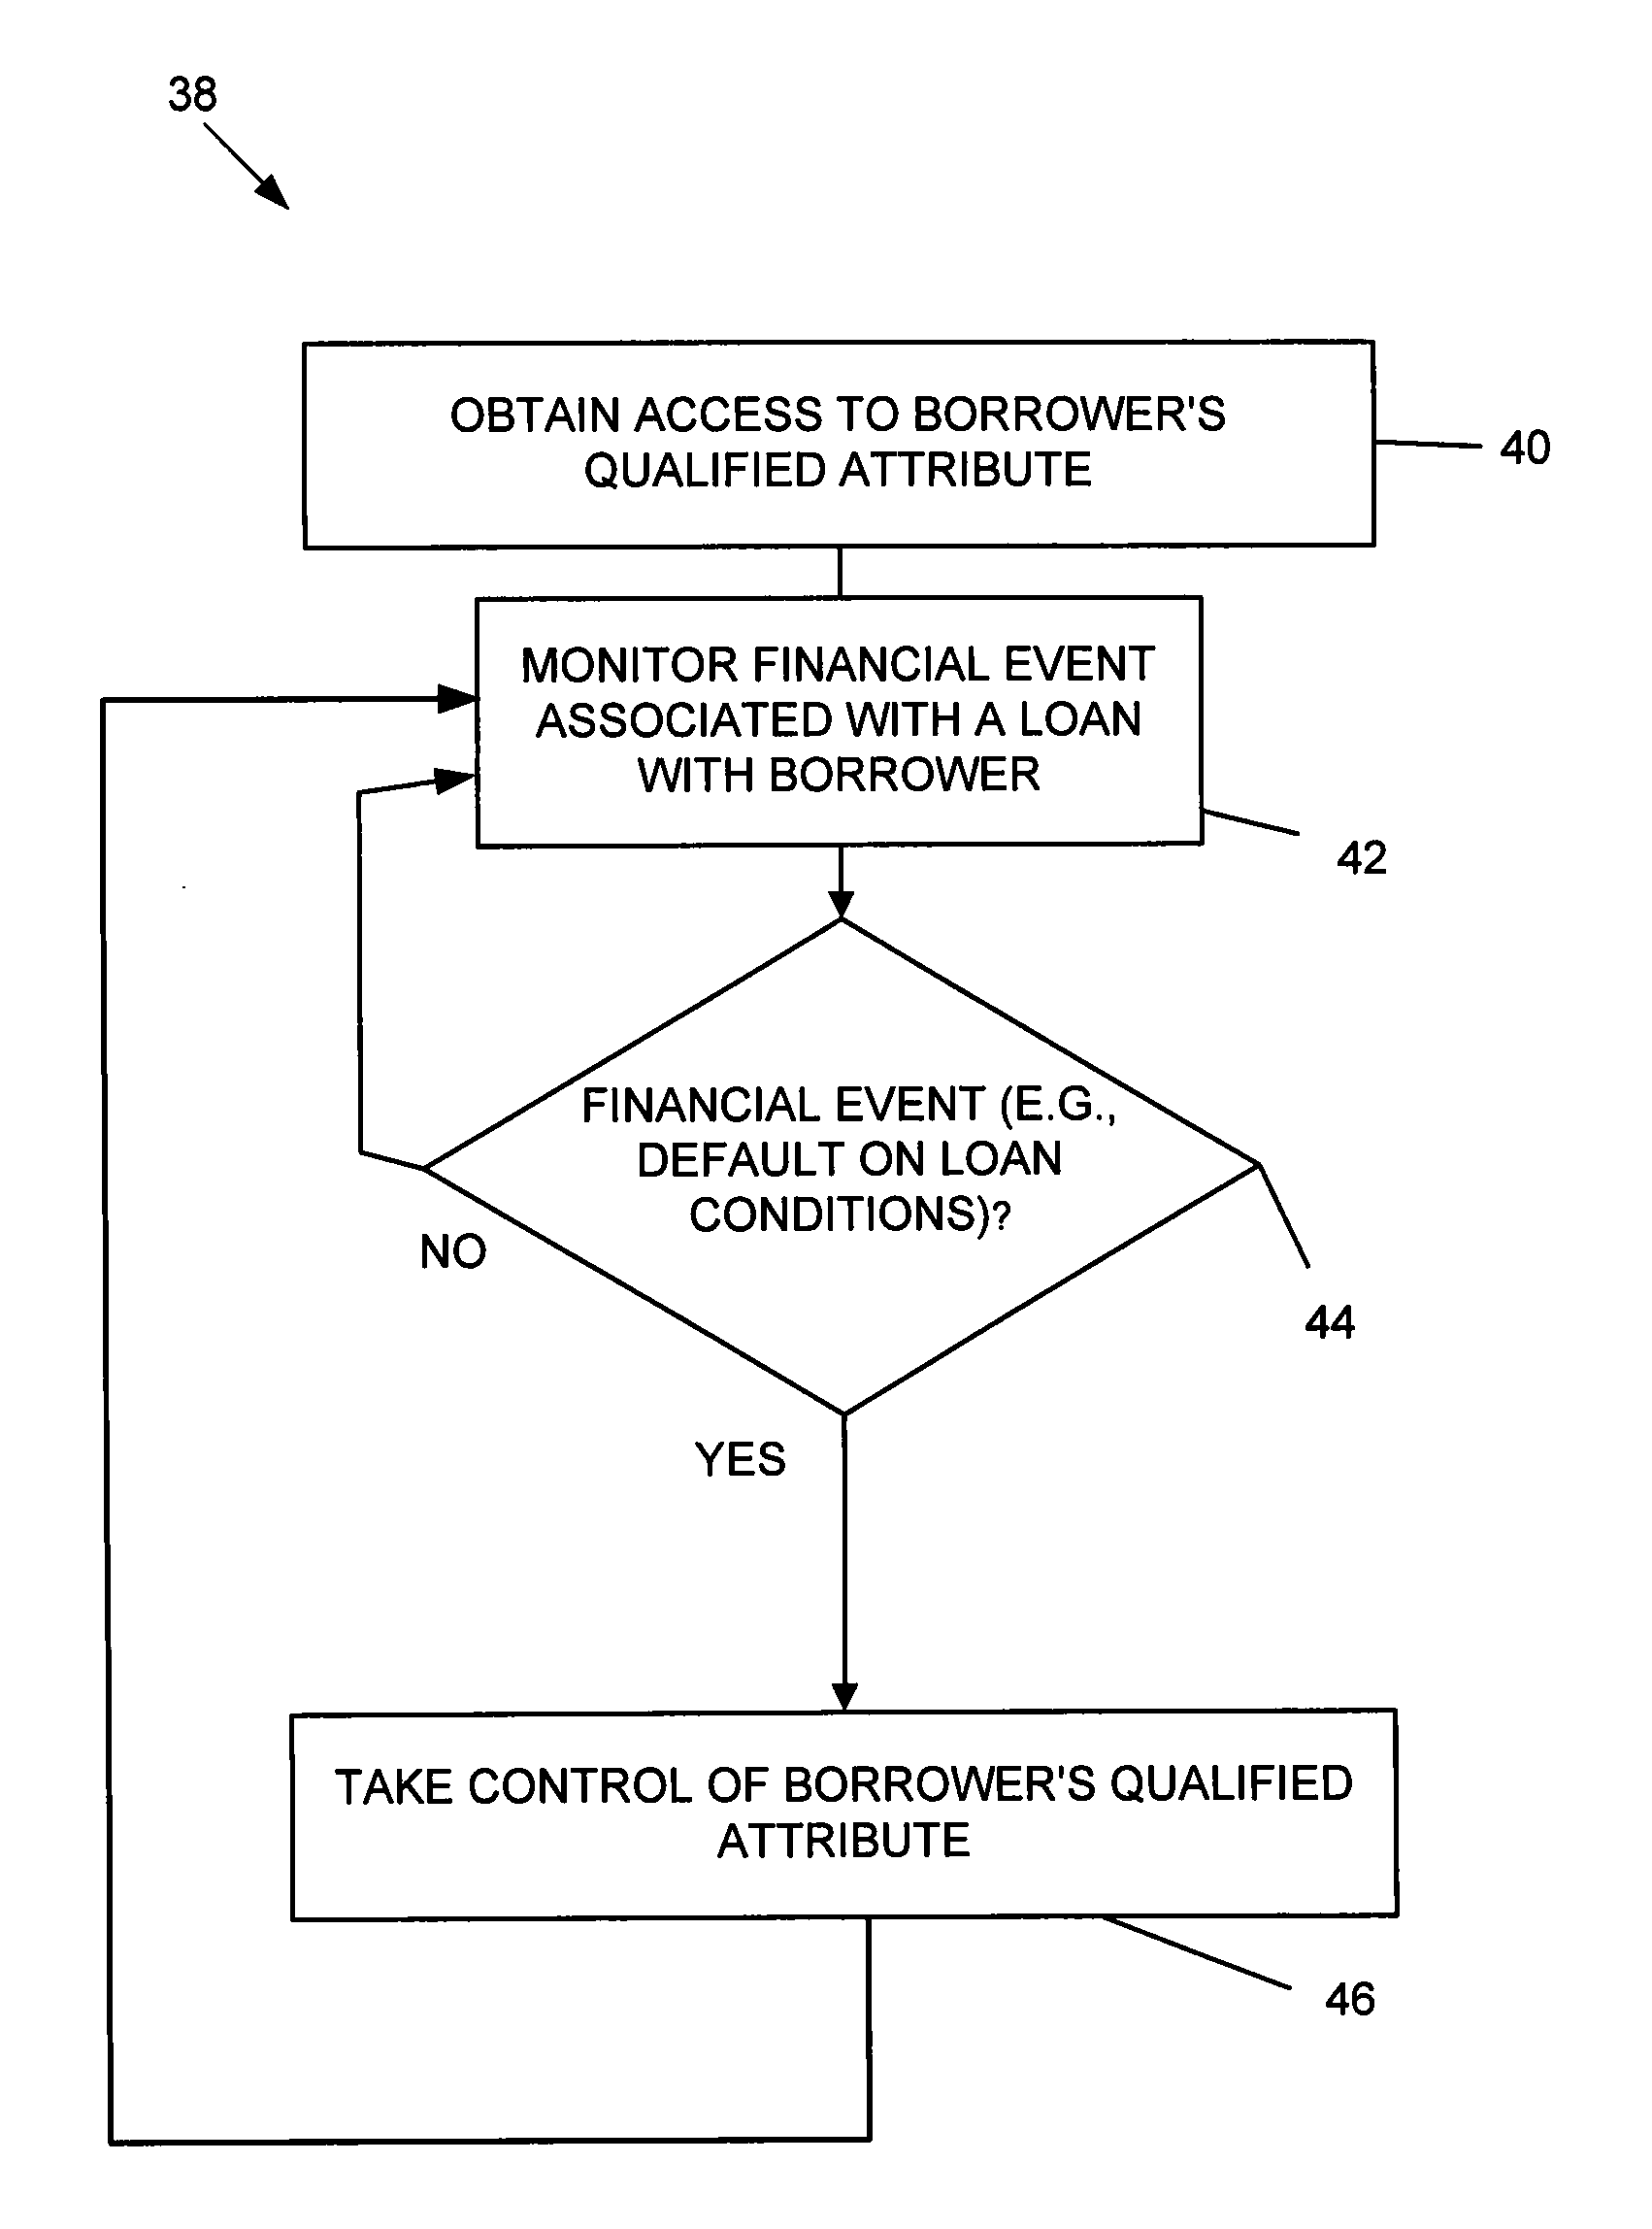 Systems and methods for underwriting loans